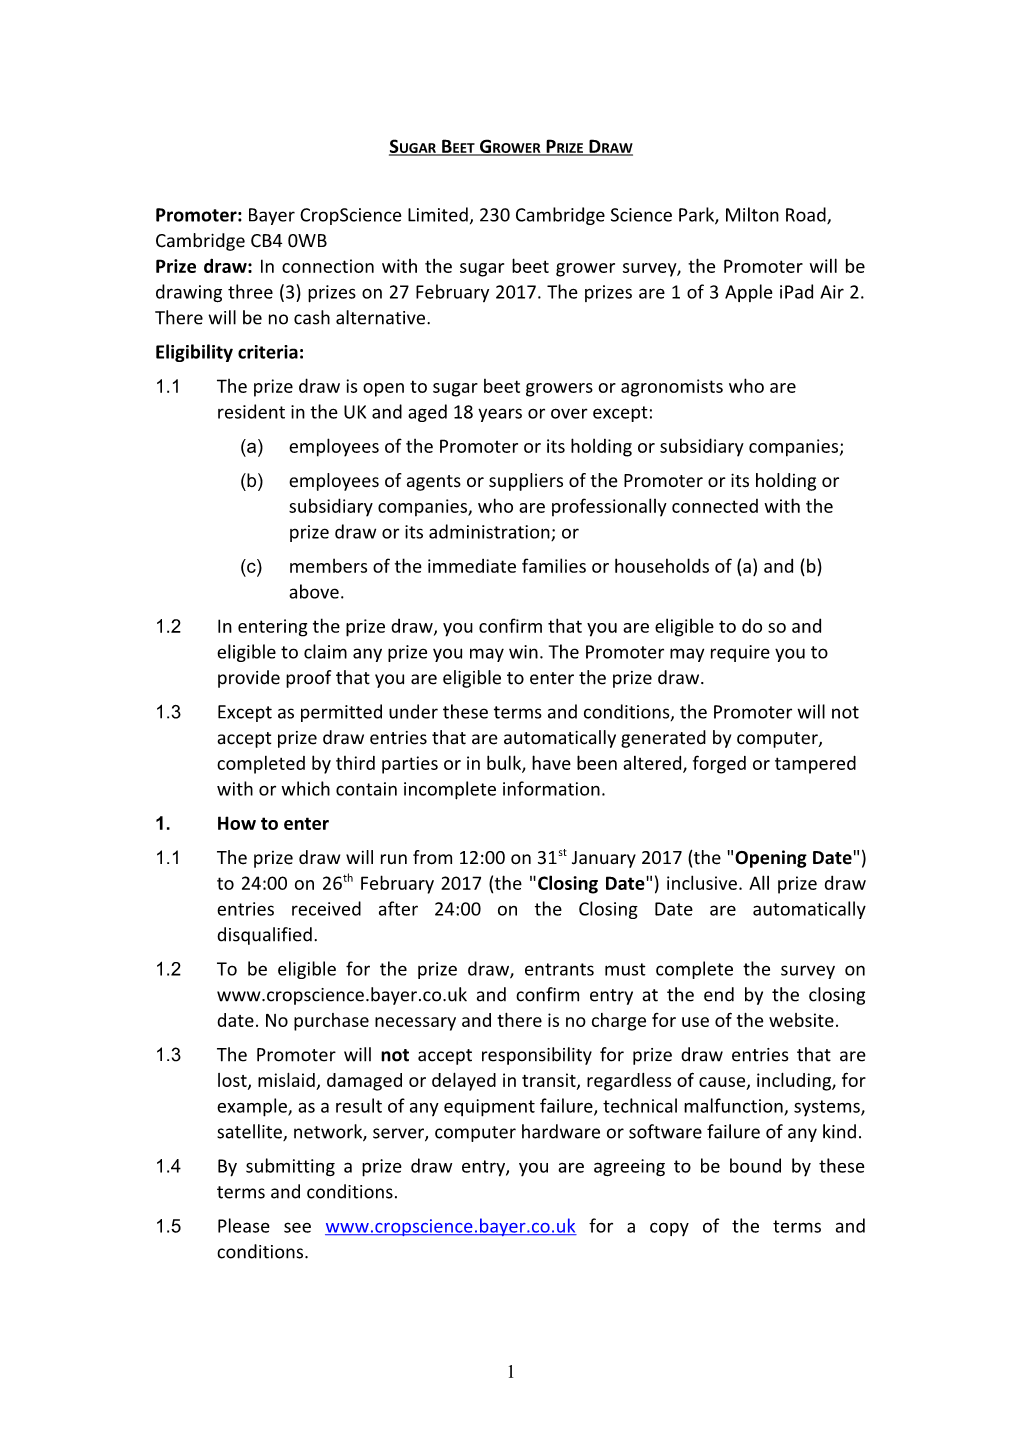 UK Prize Competition Terms and Conditions